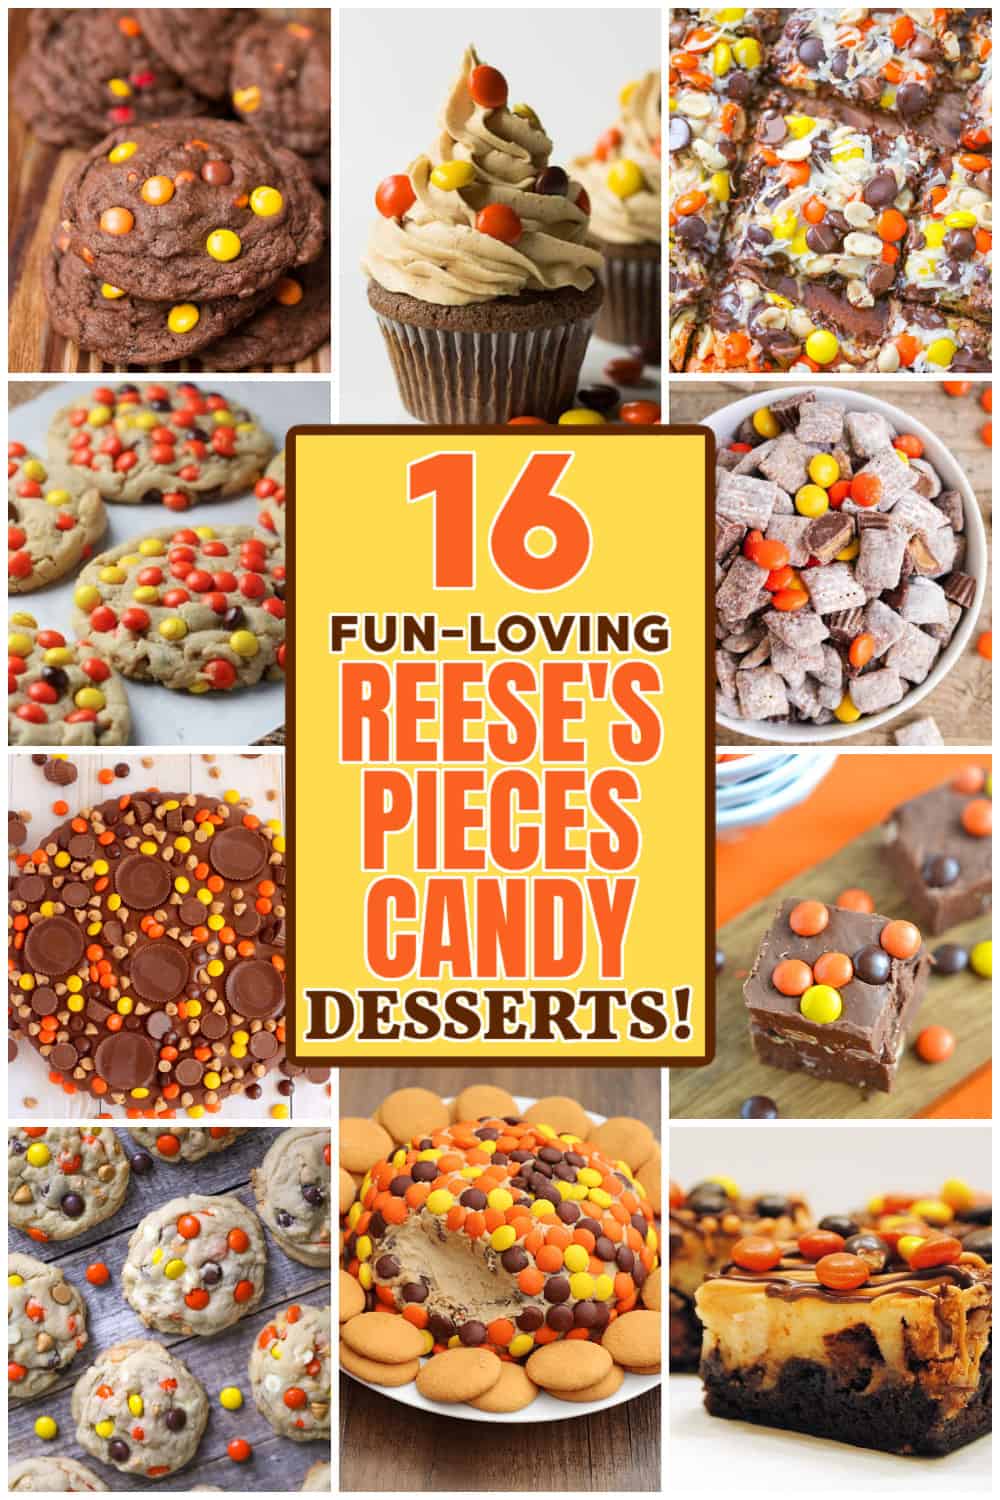 16 Reese’s Pieces Candy Desserts 